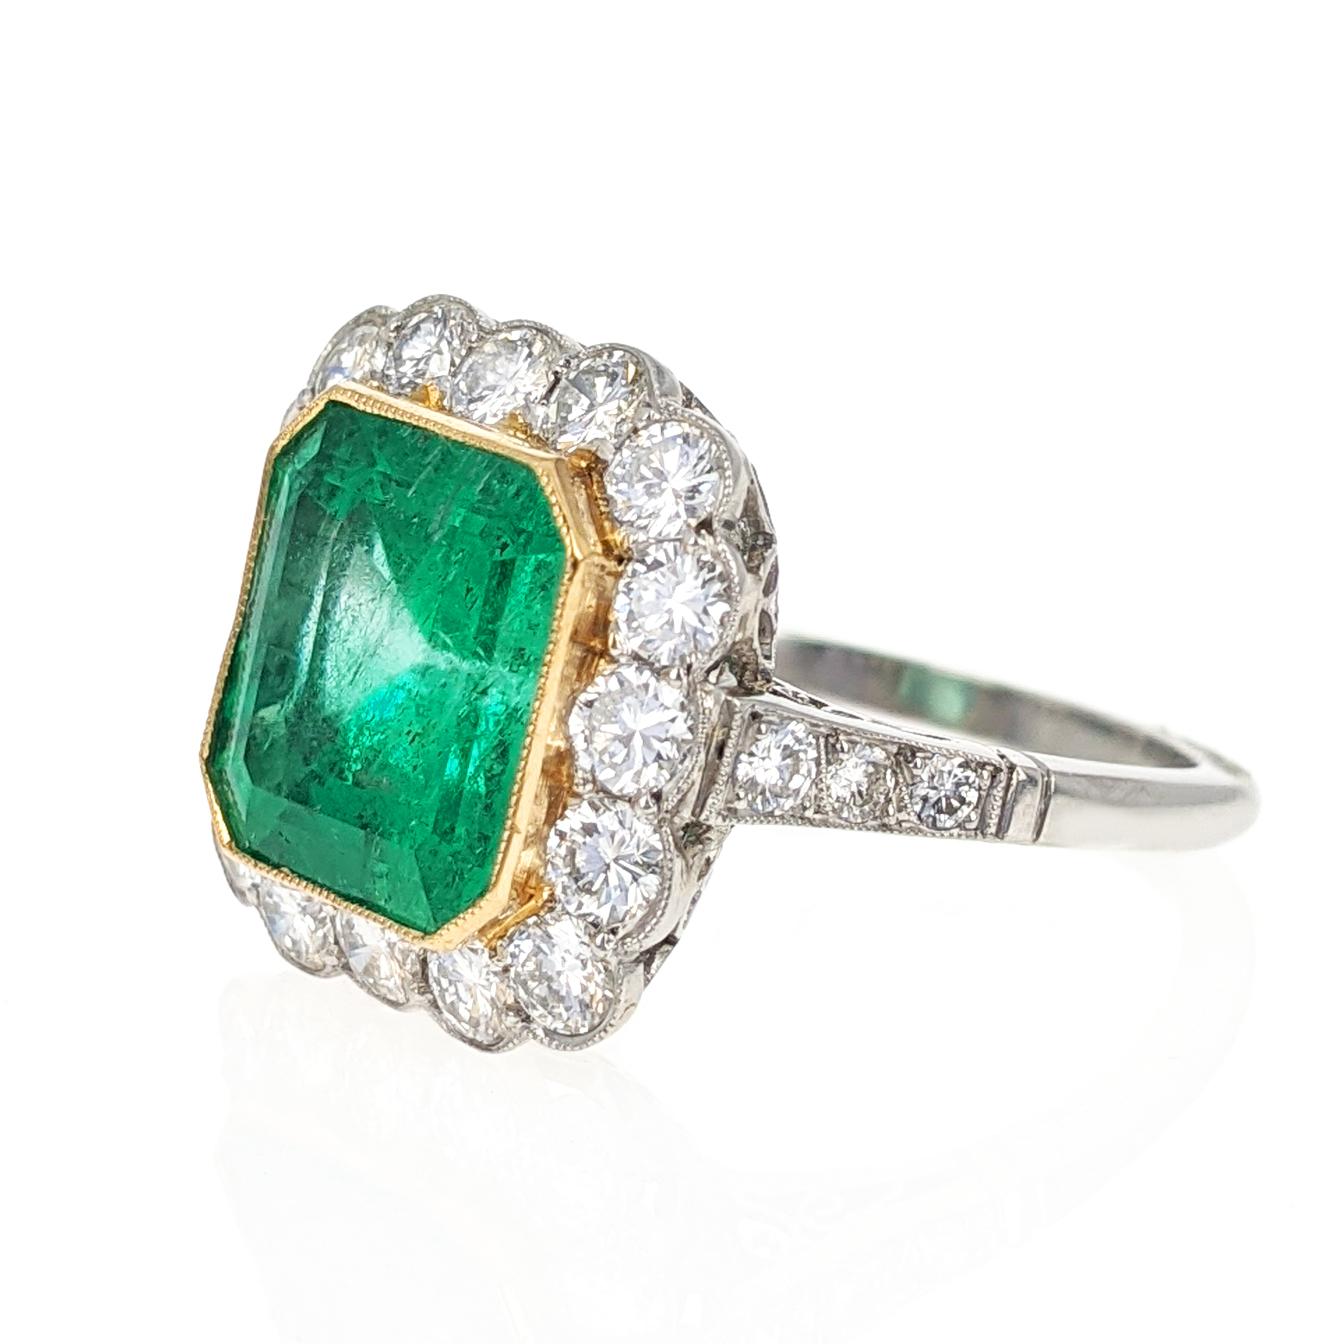 This beautiful ring centers upon a 4.43 carat octagonal step-cut emerald, bezel set in yellow gold, surrounded by 16 round brilliant-cut diamonds, further flanked by 3 round brilliant-cut diamonds on each of the shoulders. Total diamond weight is